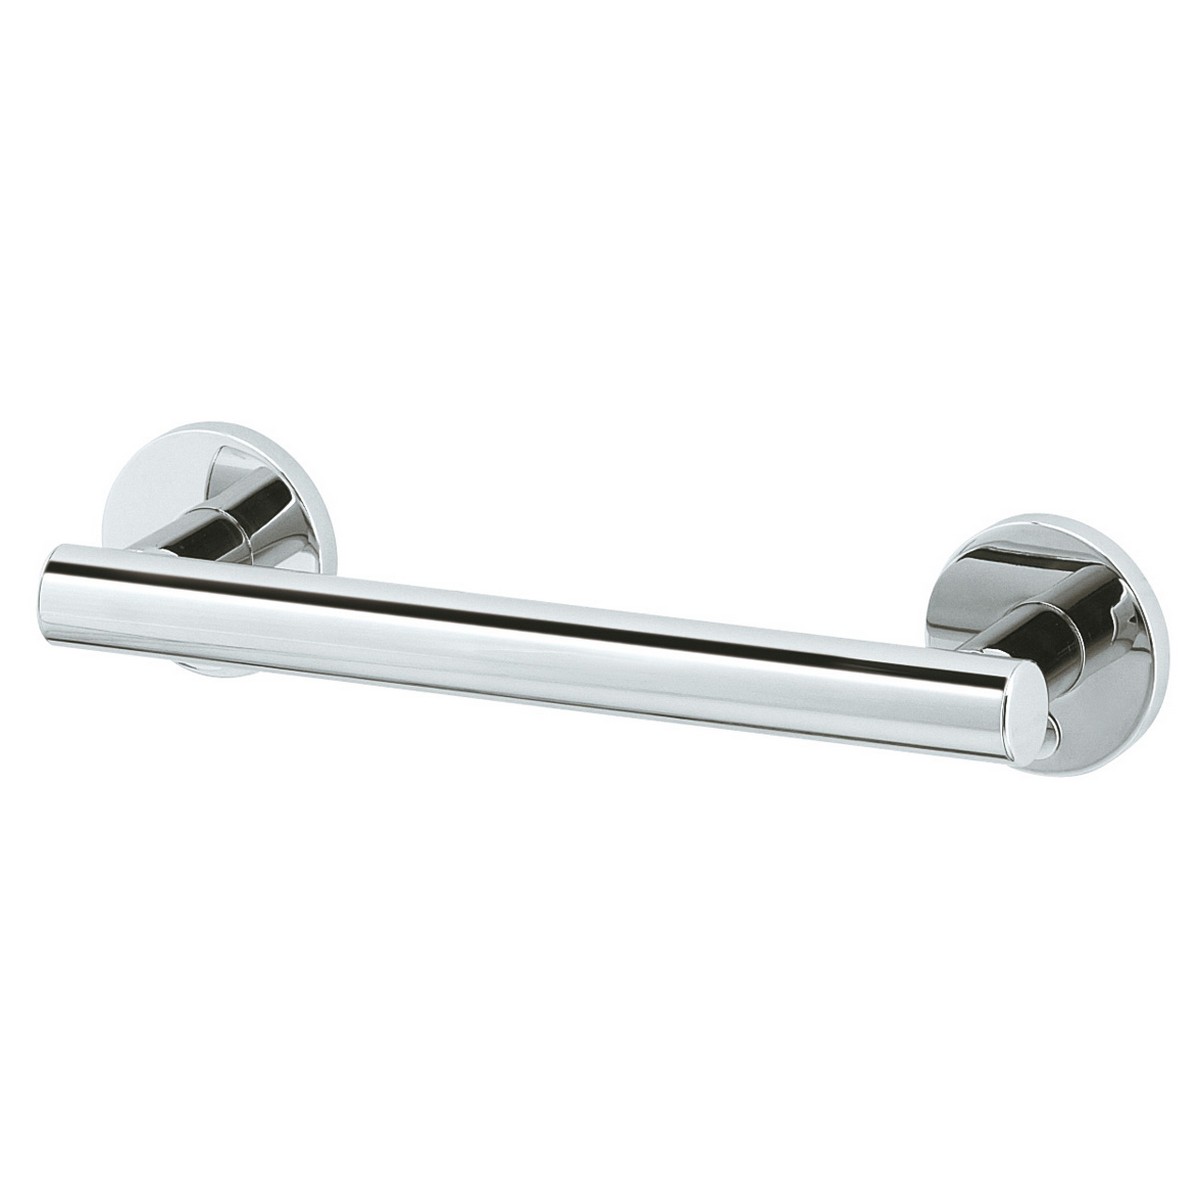 KEUCO 35901014200 PLAN CARE 42 INCH WALL MOUNTED SUPPORT RAIL IN POLISHED CHROME